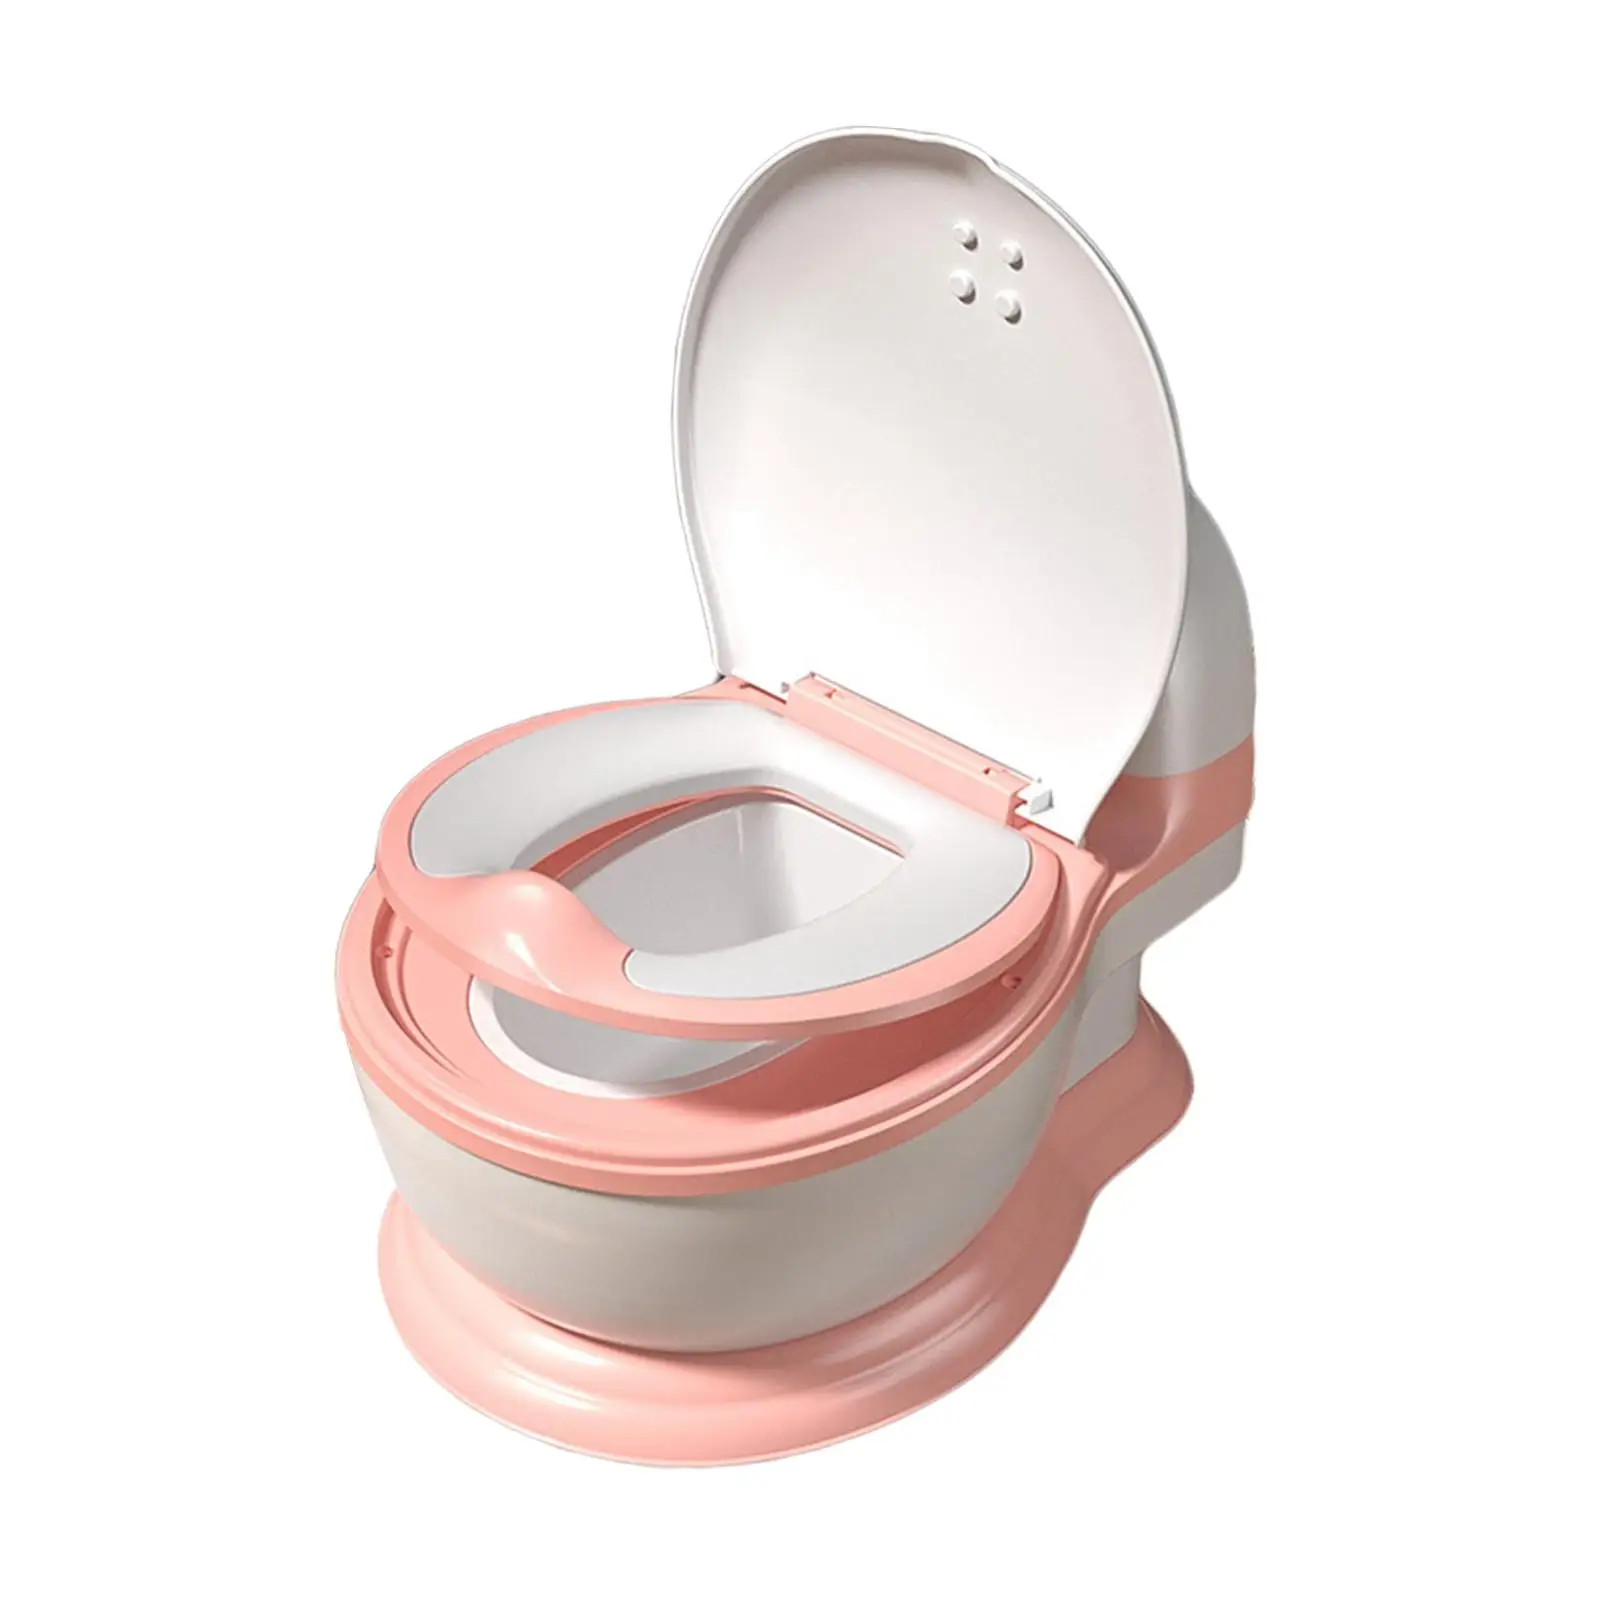 Potty Train Toilet with Pad Comfortable Realistic Training Transition Potty Seat for Kindergarten Indoor Hotel Nursery Boys